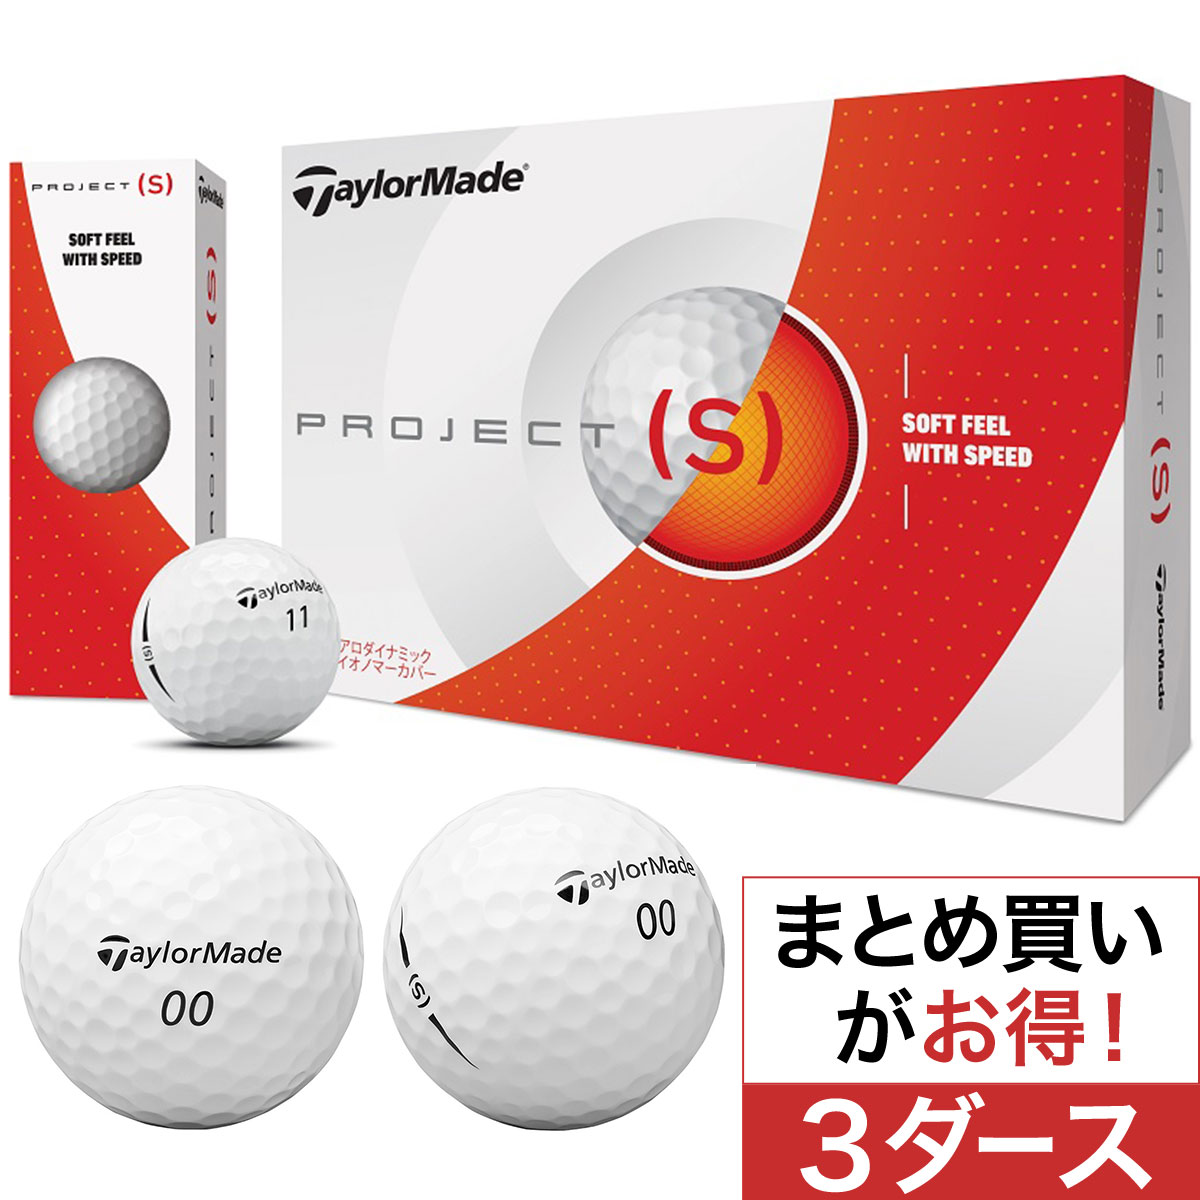  PROJECT(S) ボール 3ダースセット 